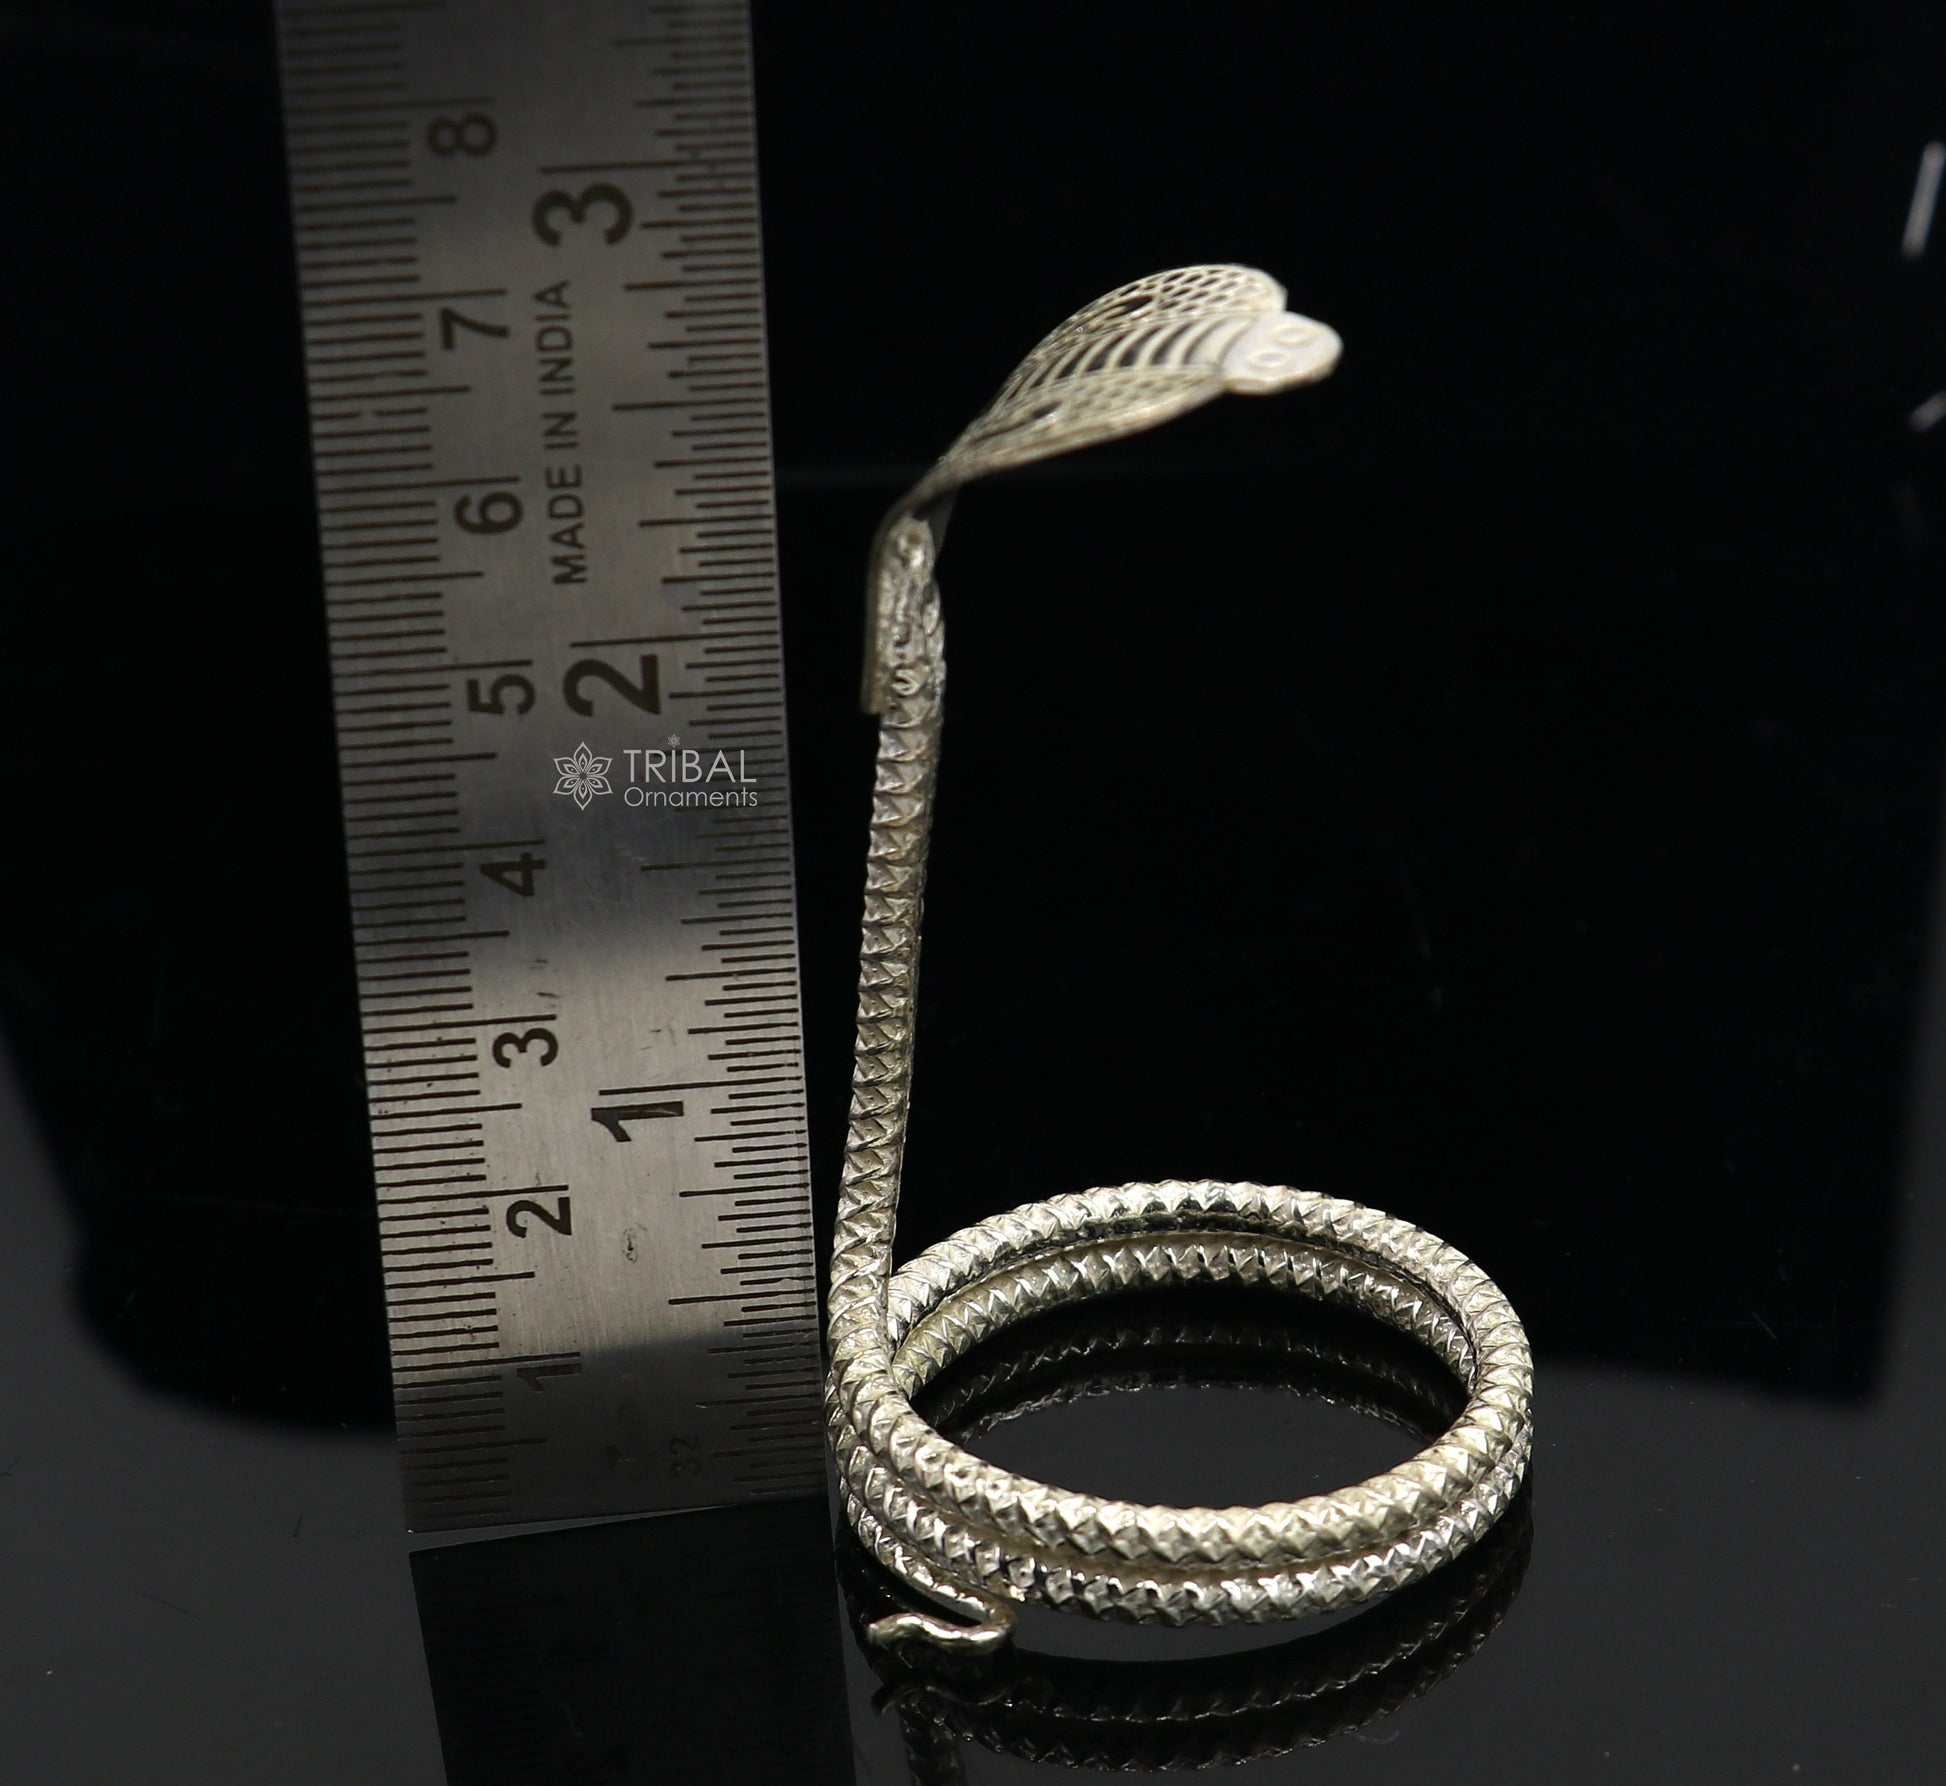 Shiva Snake Solid silver handmade Divine vintage style mini snake or shiva snake for puja or worshipping, solid Diwali puja article su1147 - TRIBAL ORNAMENTS